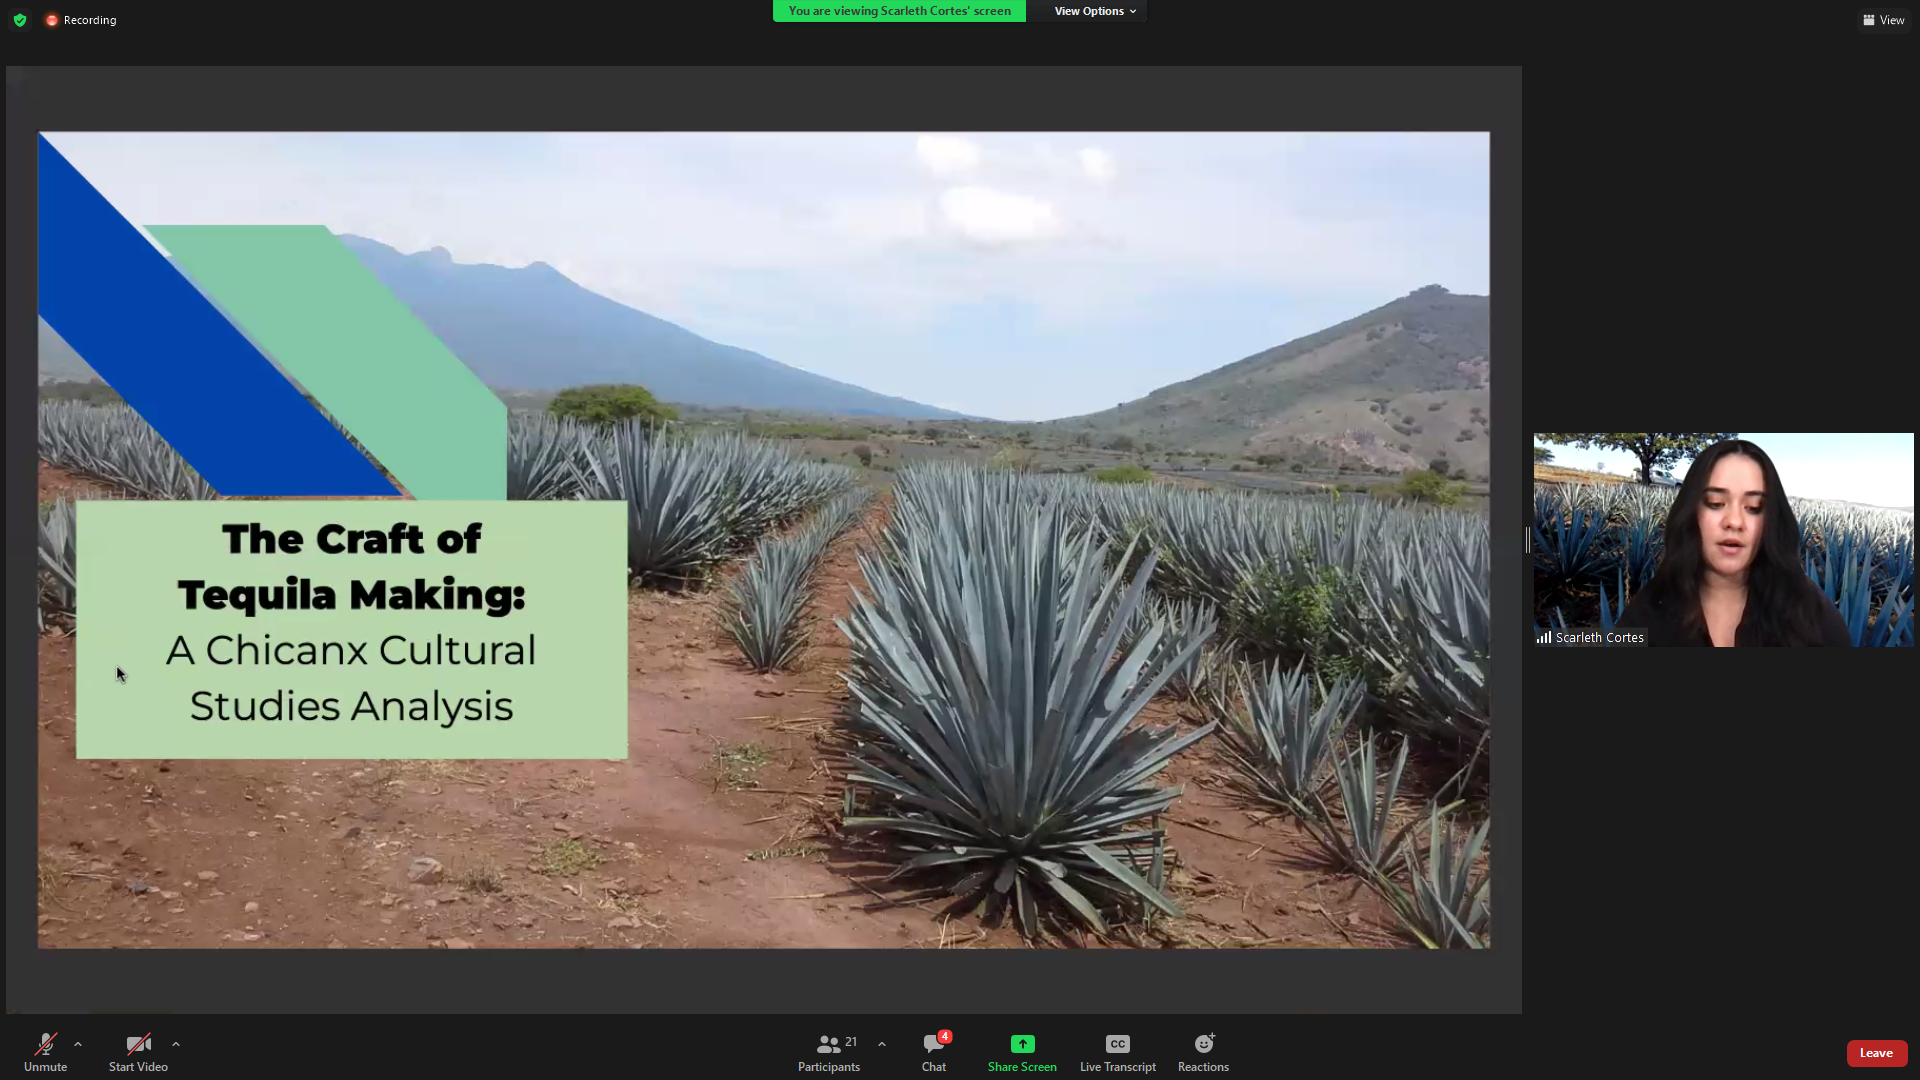 The conference featured research presentations throughout various sessions, such as the Reclaiming the Narrative session during which Scarleth Cortes presented The Craft of Tequila Making: A Chicanx Cultural Studies Analysis. (Screenshot captured by Adam Ricardo Solis)